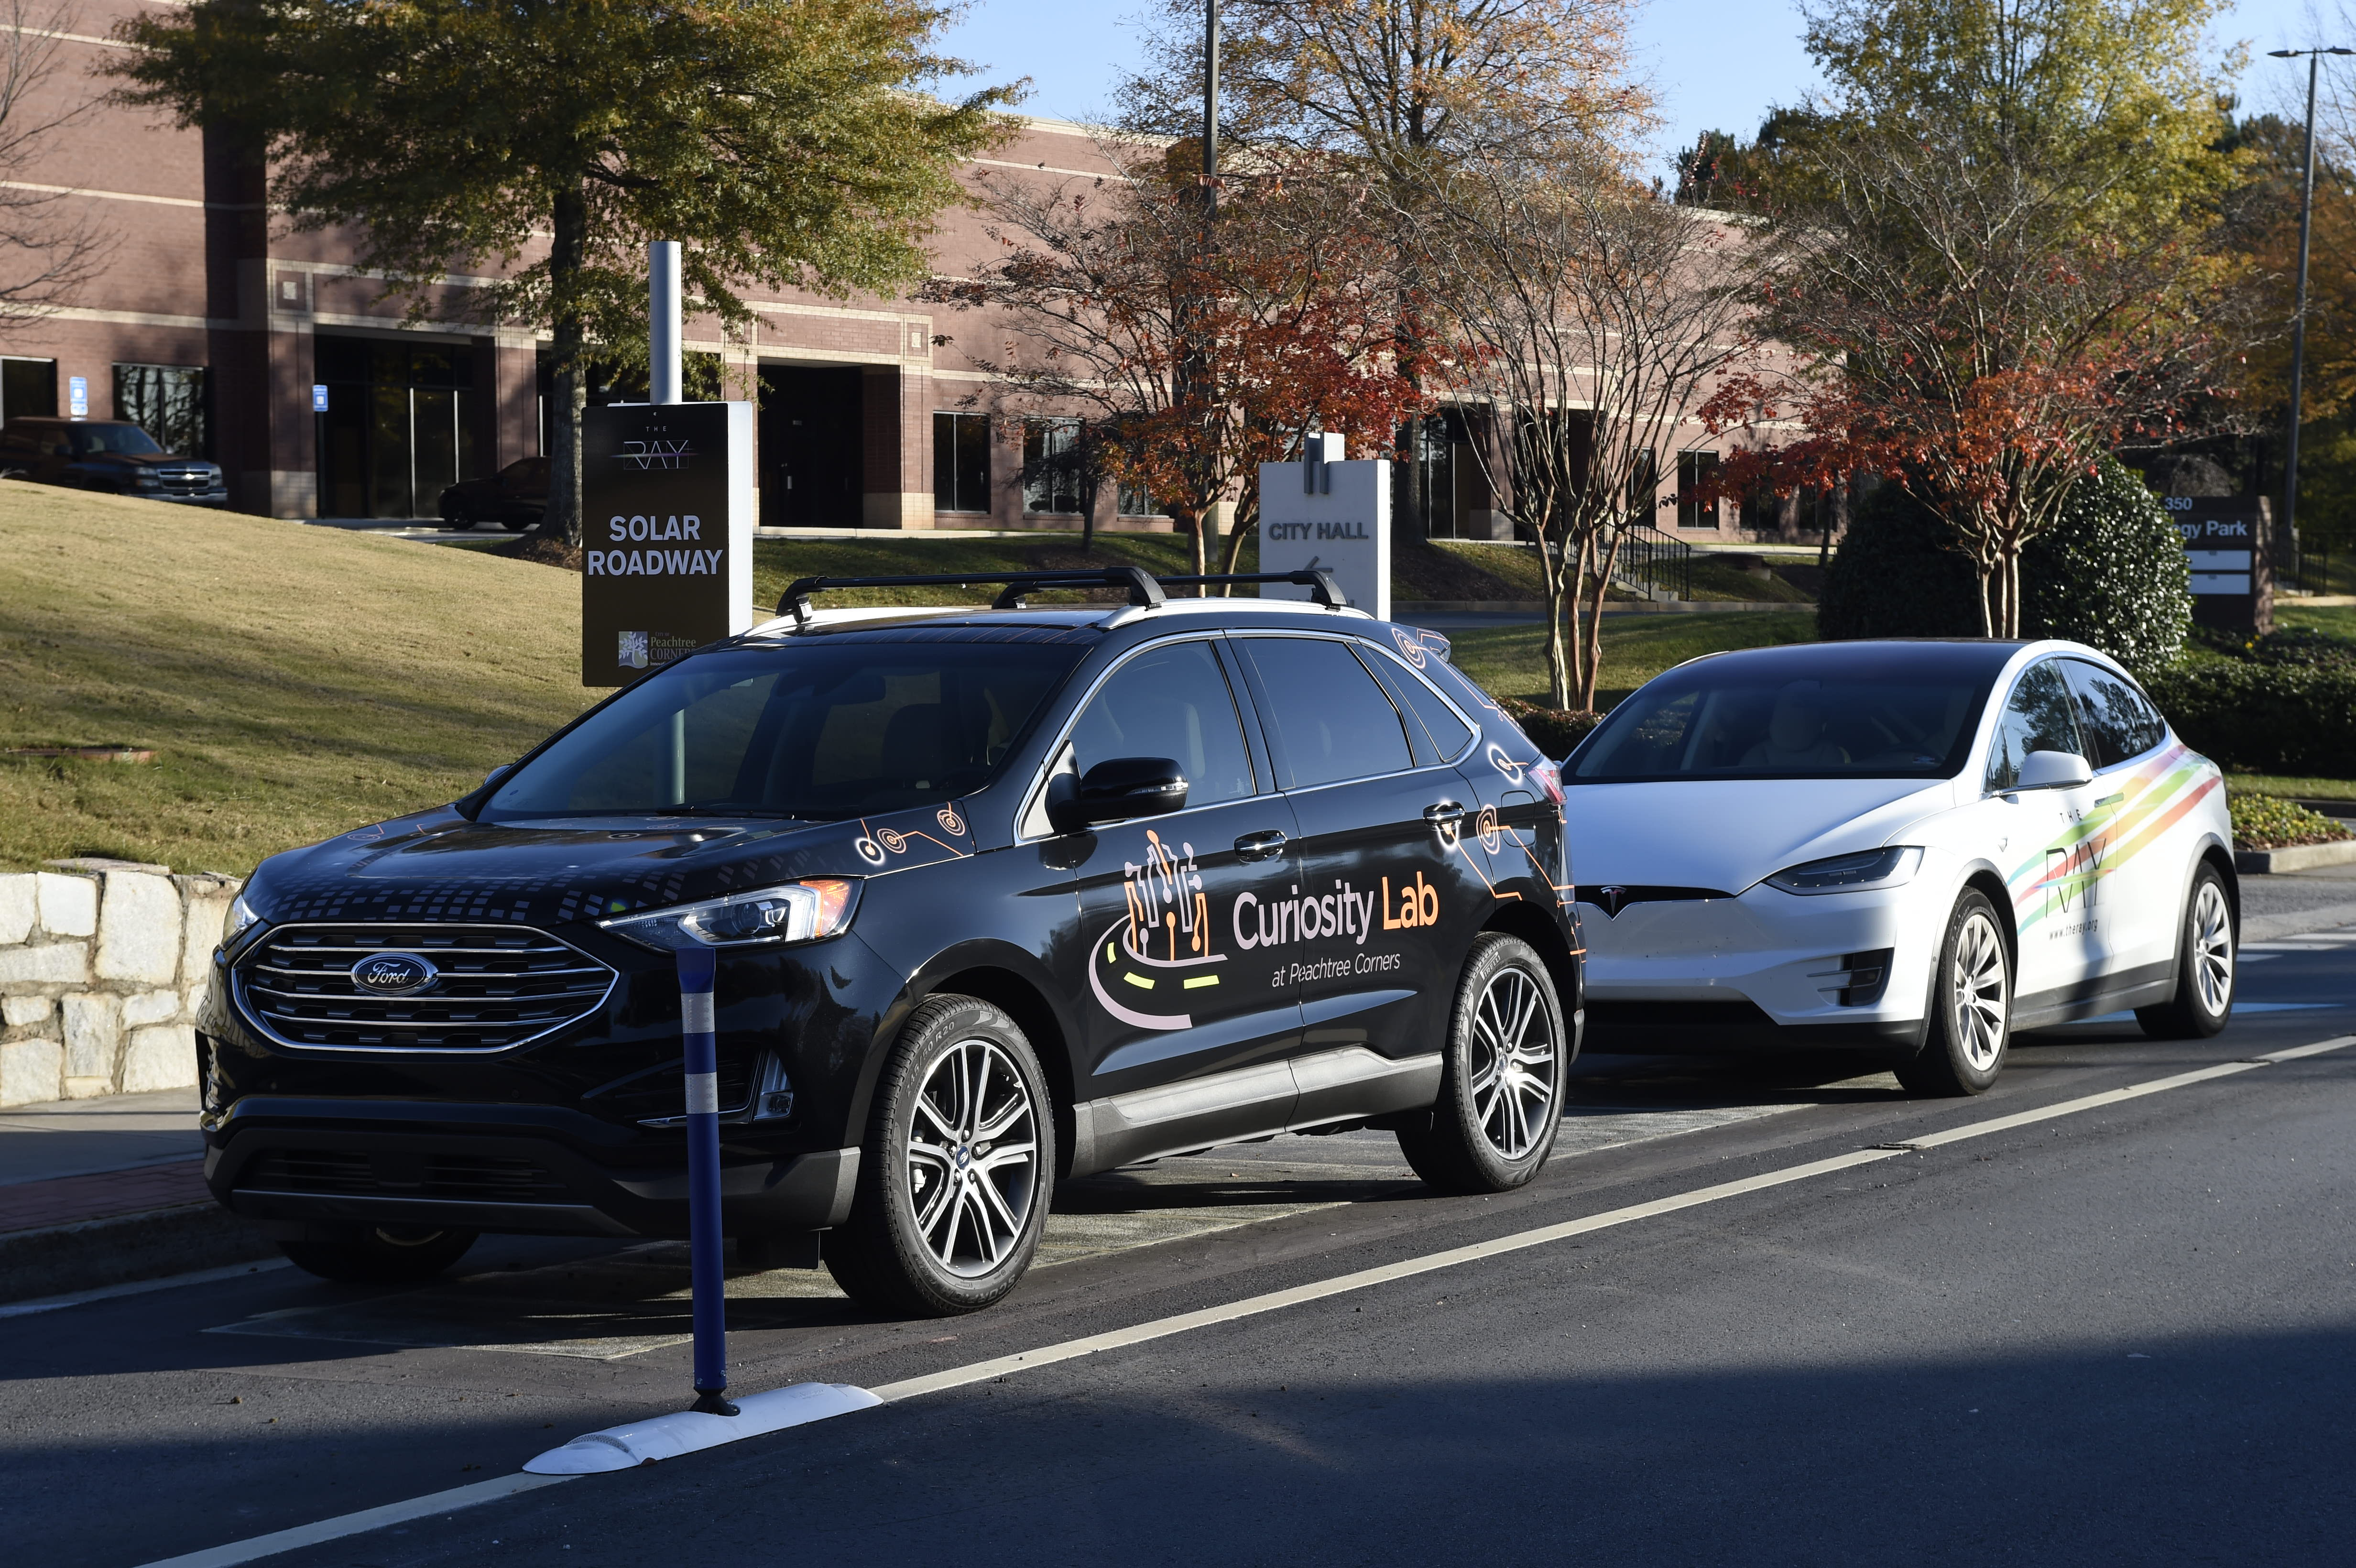 Peachtree Corners says the charger is equipped with an energy storage system for night time charging (Credit: Peachtree Corners)